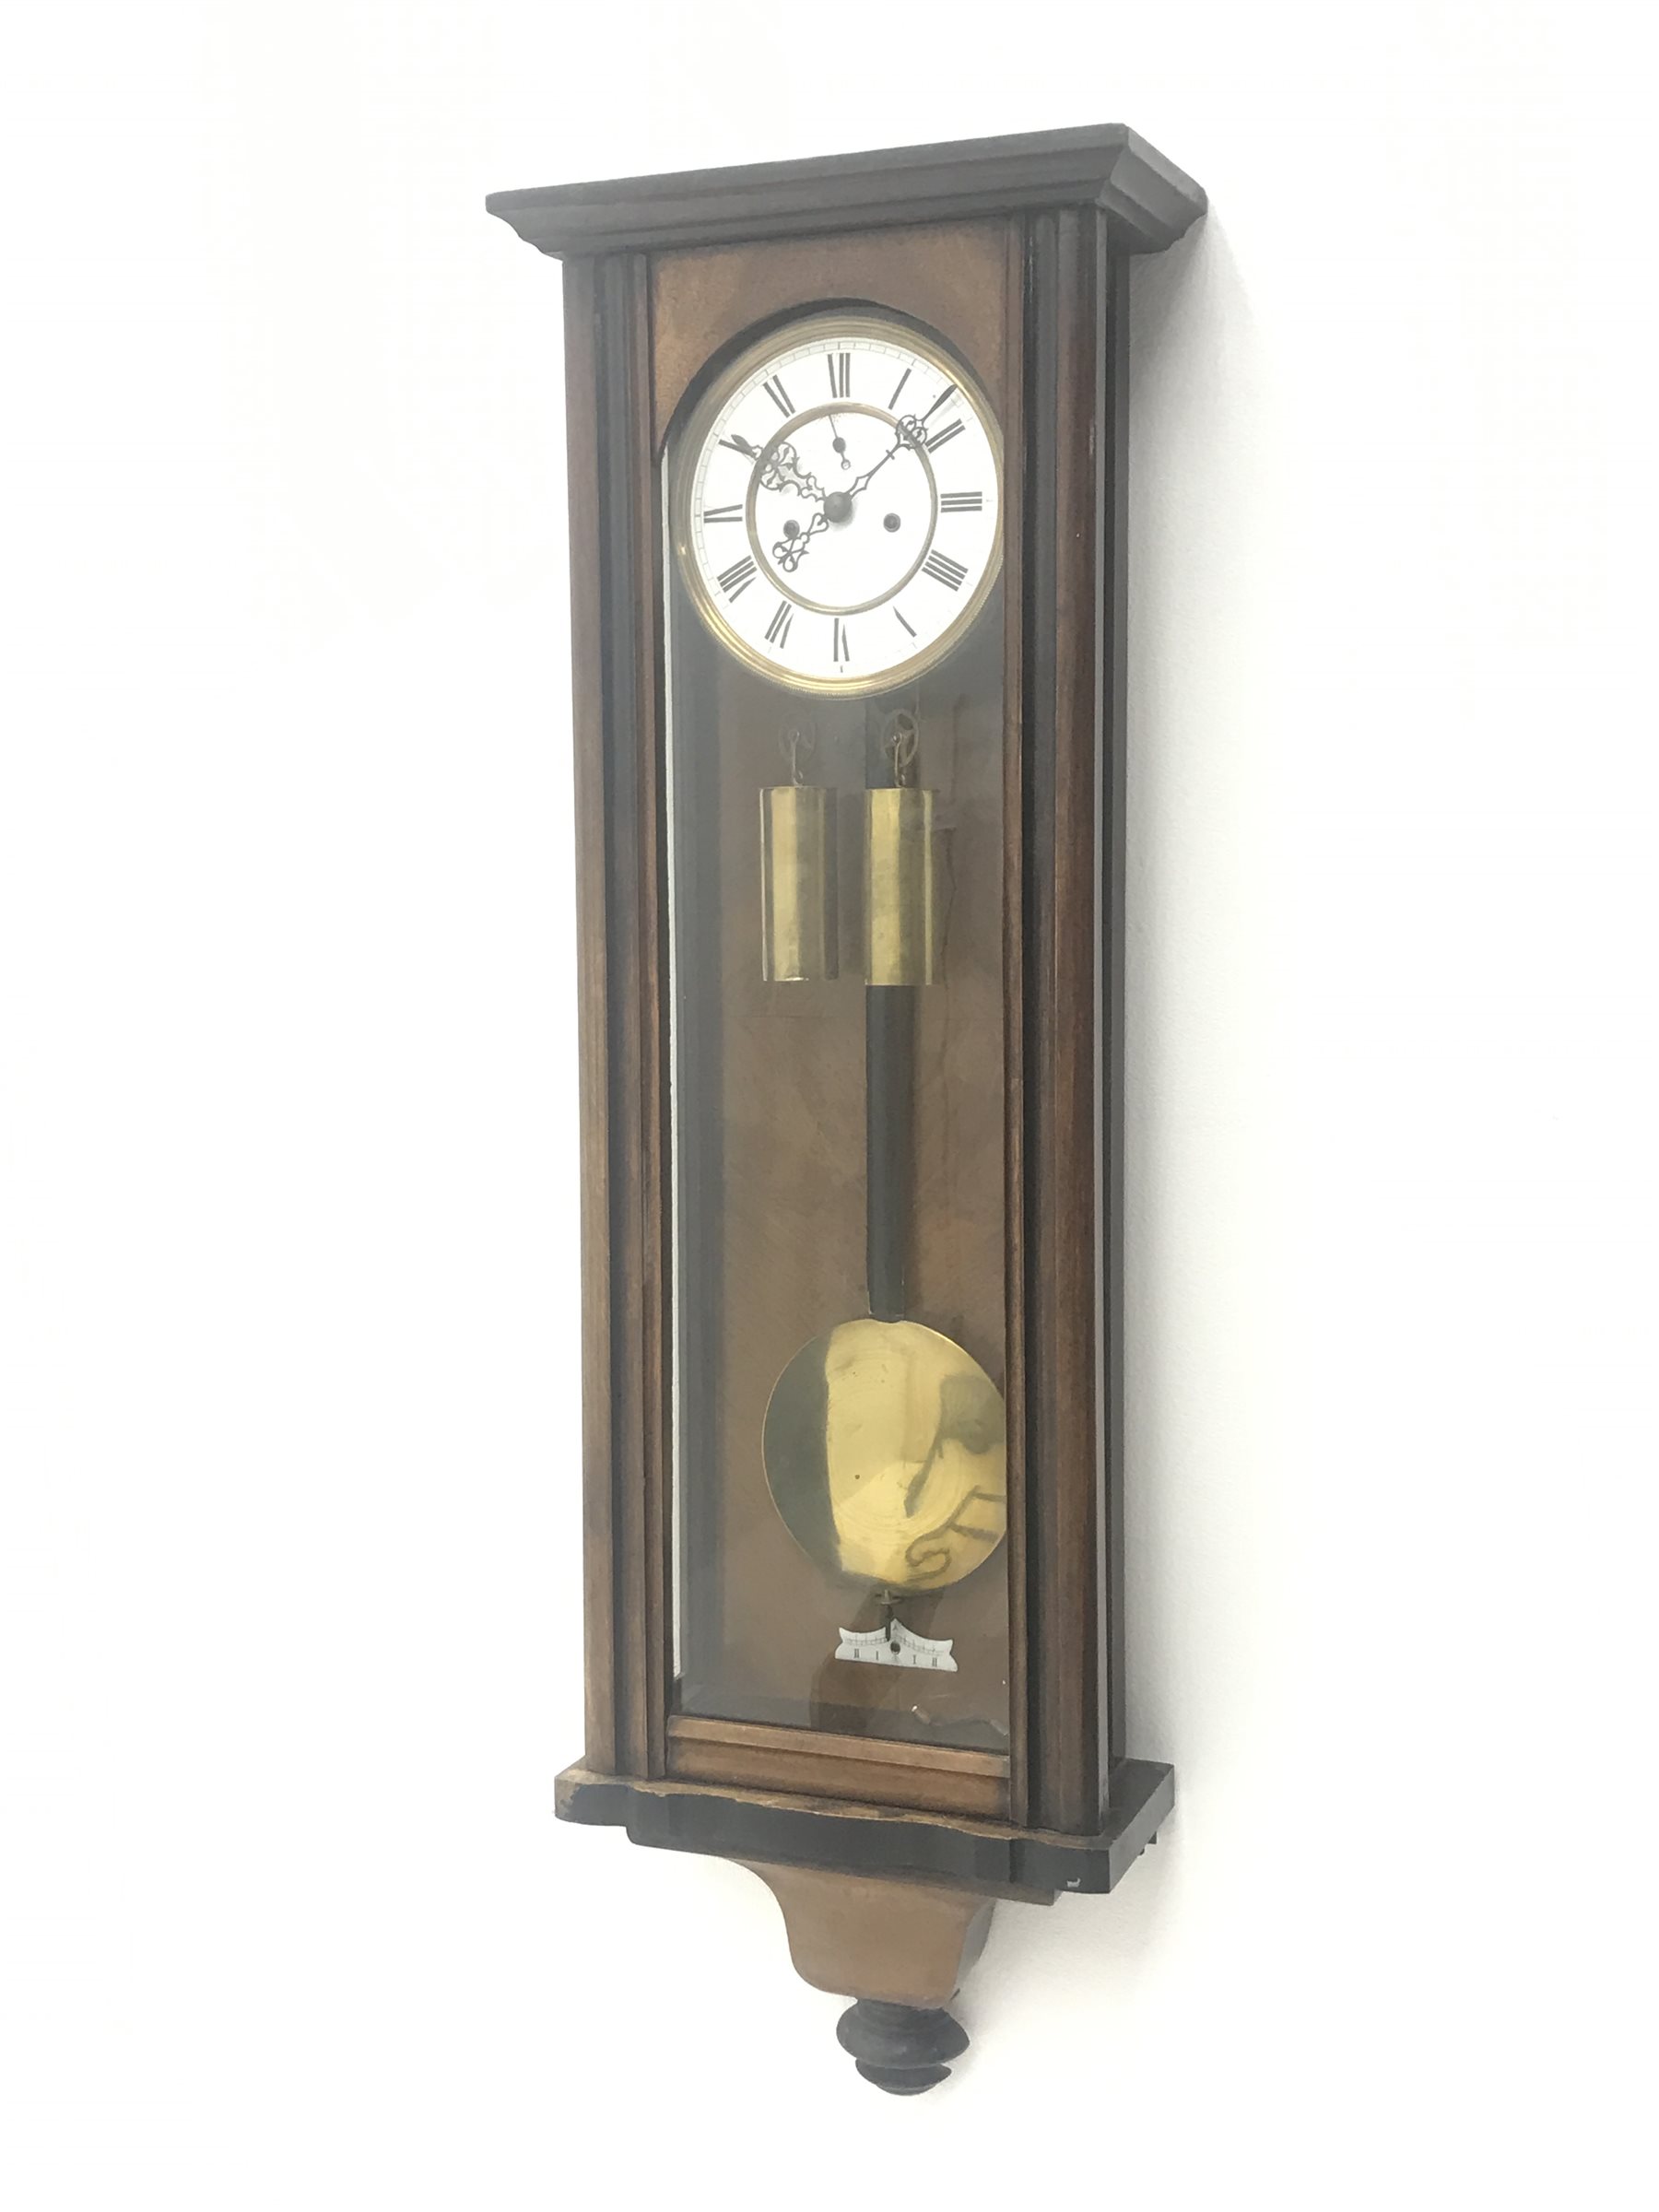 Late 19th century walnut and beech cased Vienna style wall clock, circular enamel Roman dial with su - Image 2 of 6